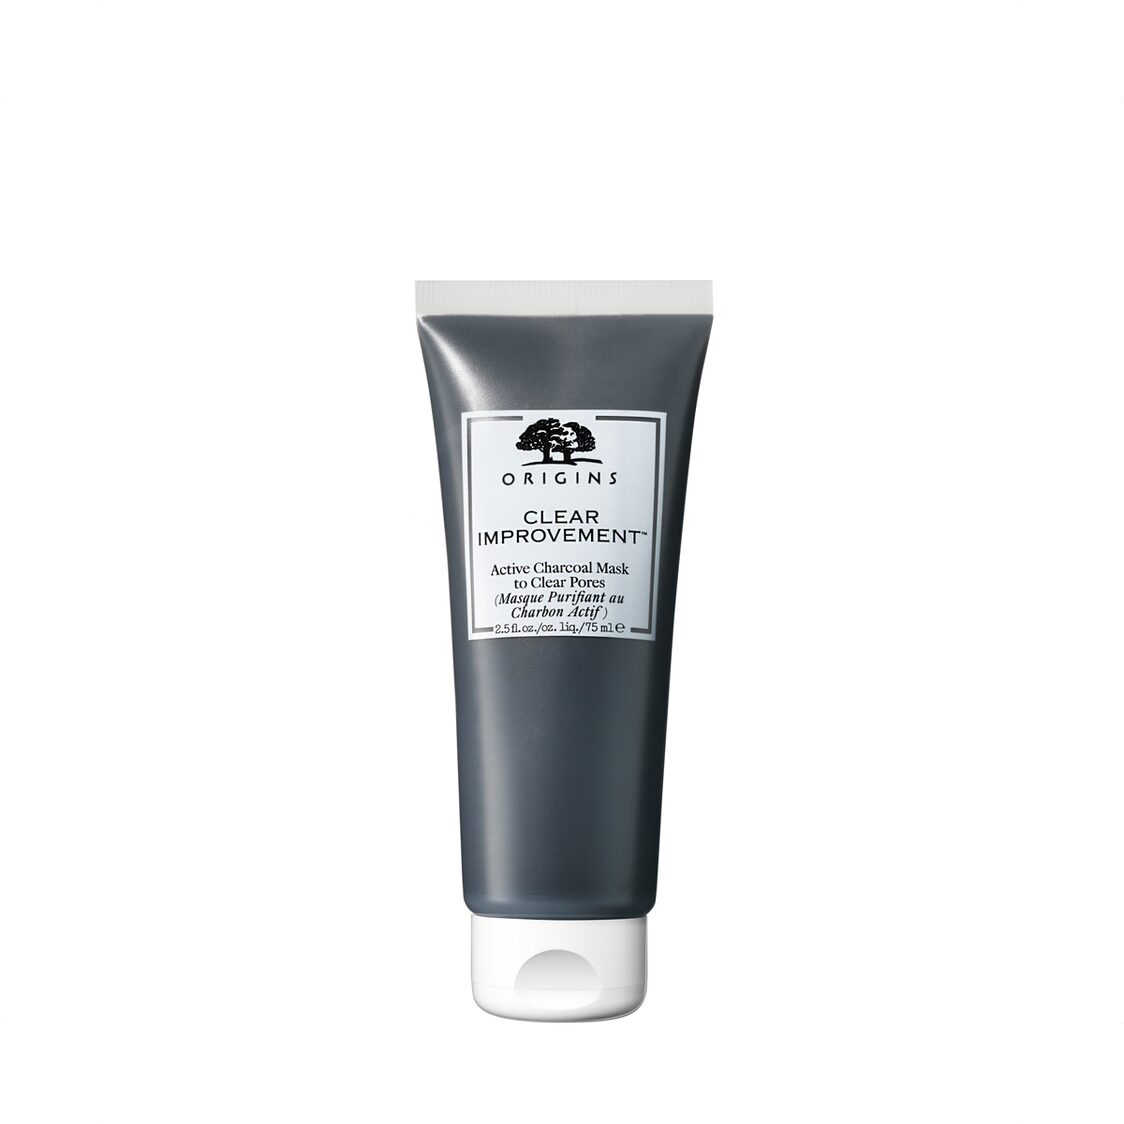 Origins Clear Improvement Active Charcoal Mask to Clear Pores 75ml